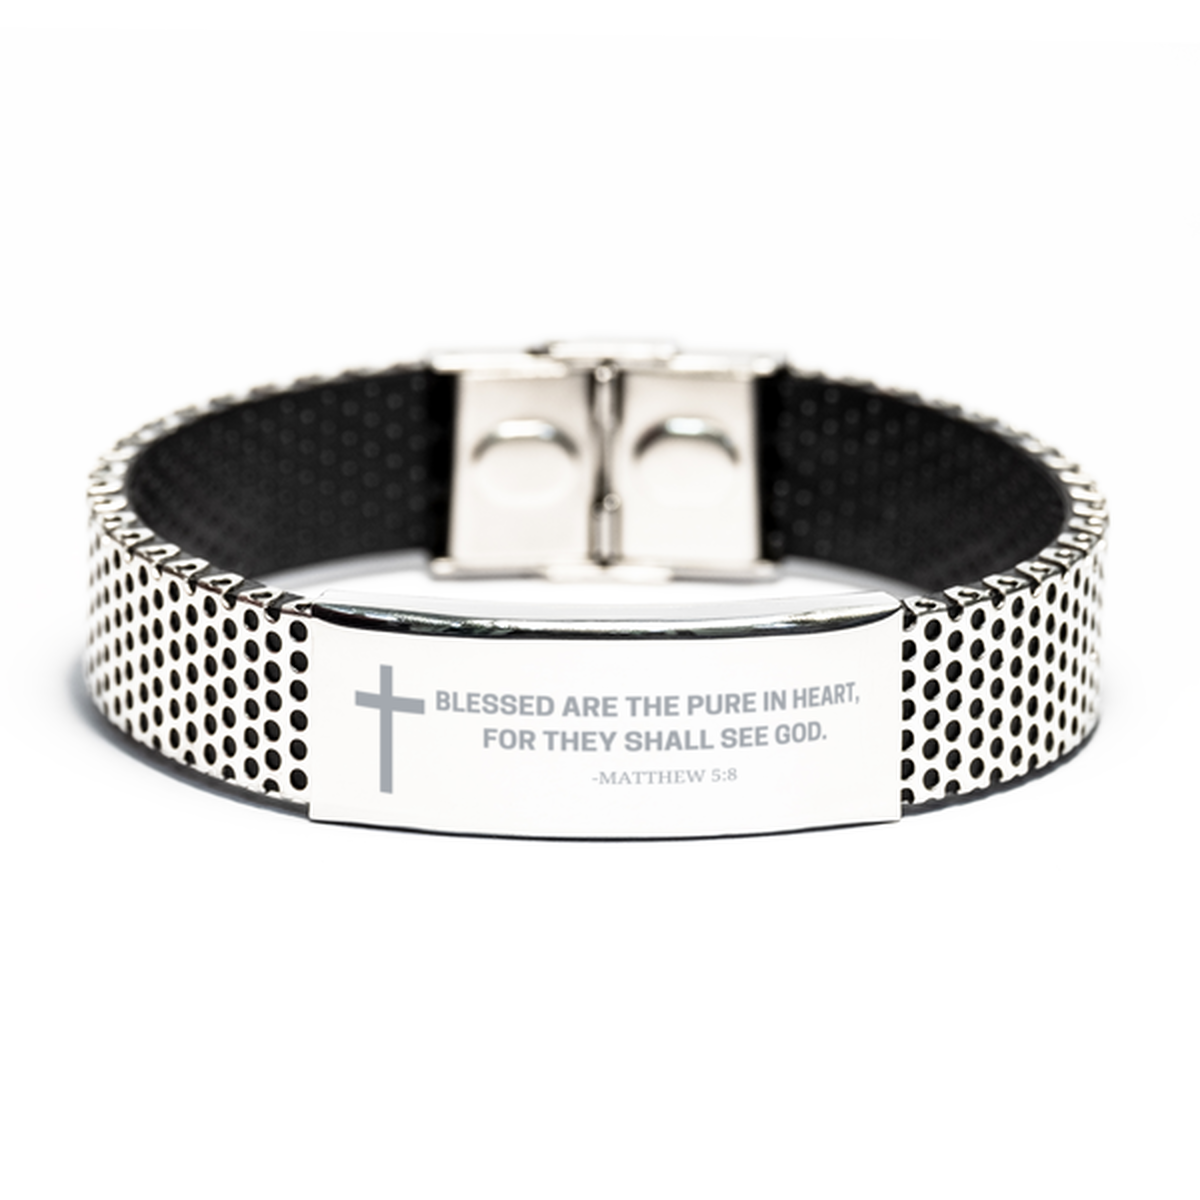 Baptism Gifts For Teenage Boys Girls, Christian Bible Verse Stainless Steel Bracelet, Blessed are the pure in heart, Catholic Confirmation Gifts for Son, Godson, Grandson, Nephew